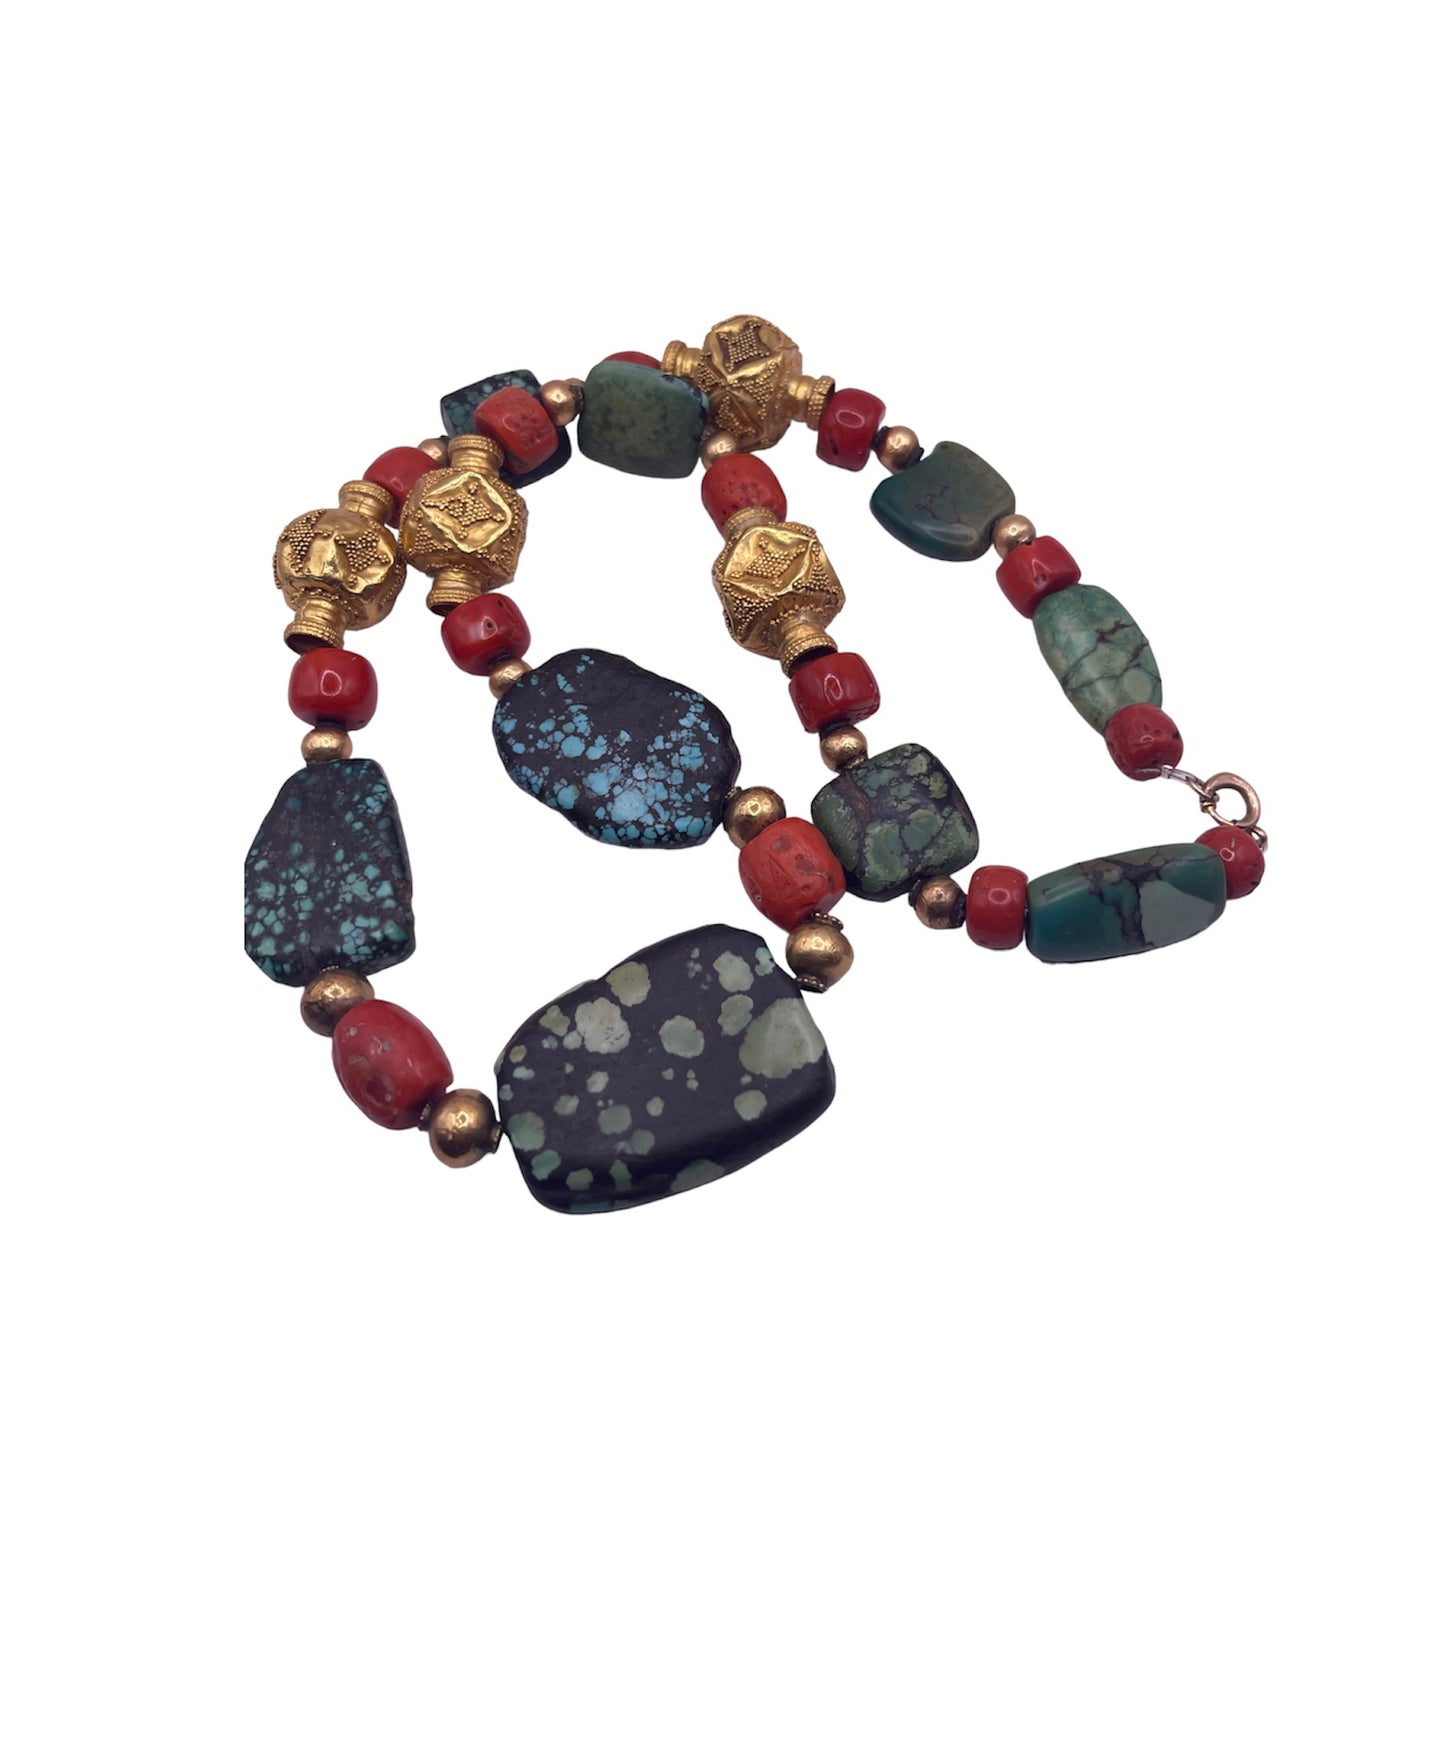 A necklace with antique Tibetan turquoise beads, coral beads and gold beads